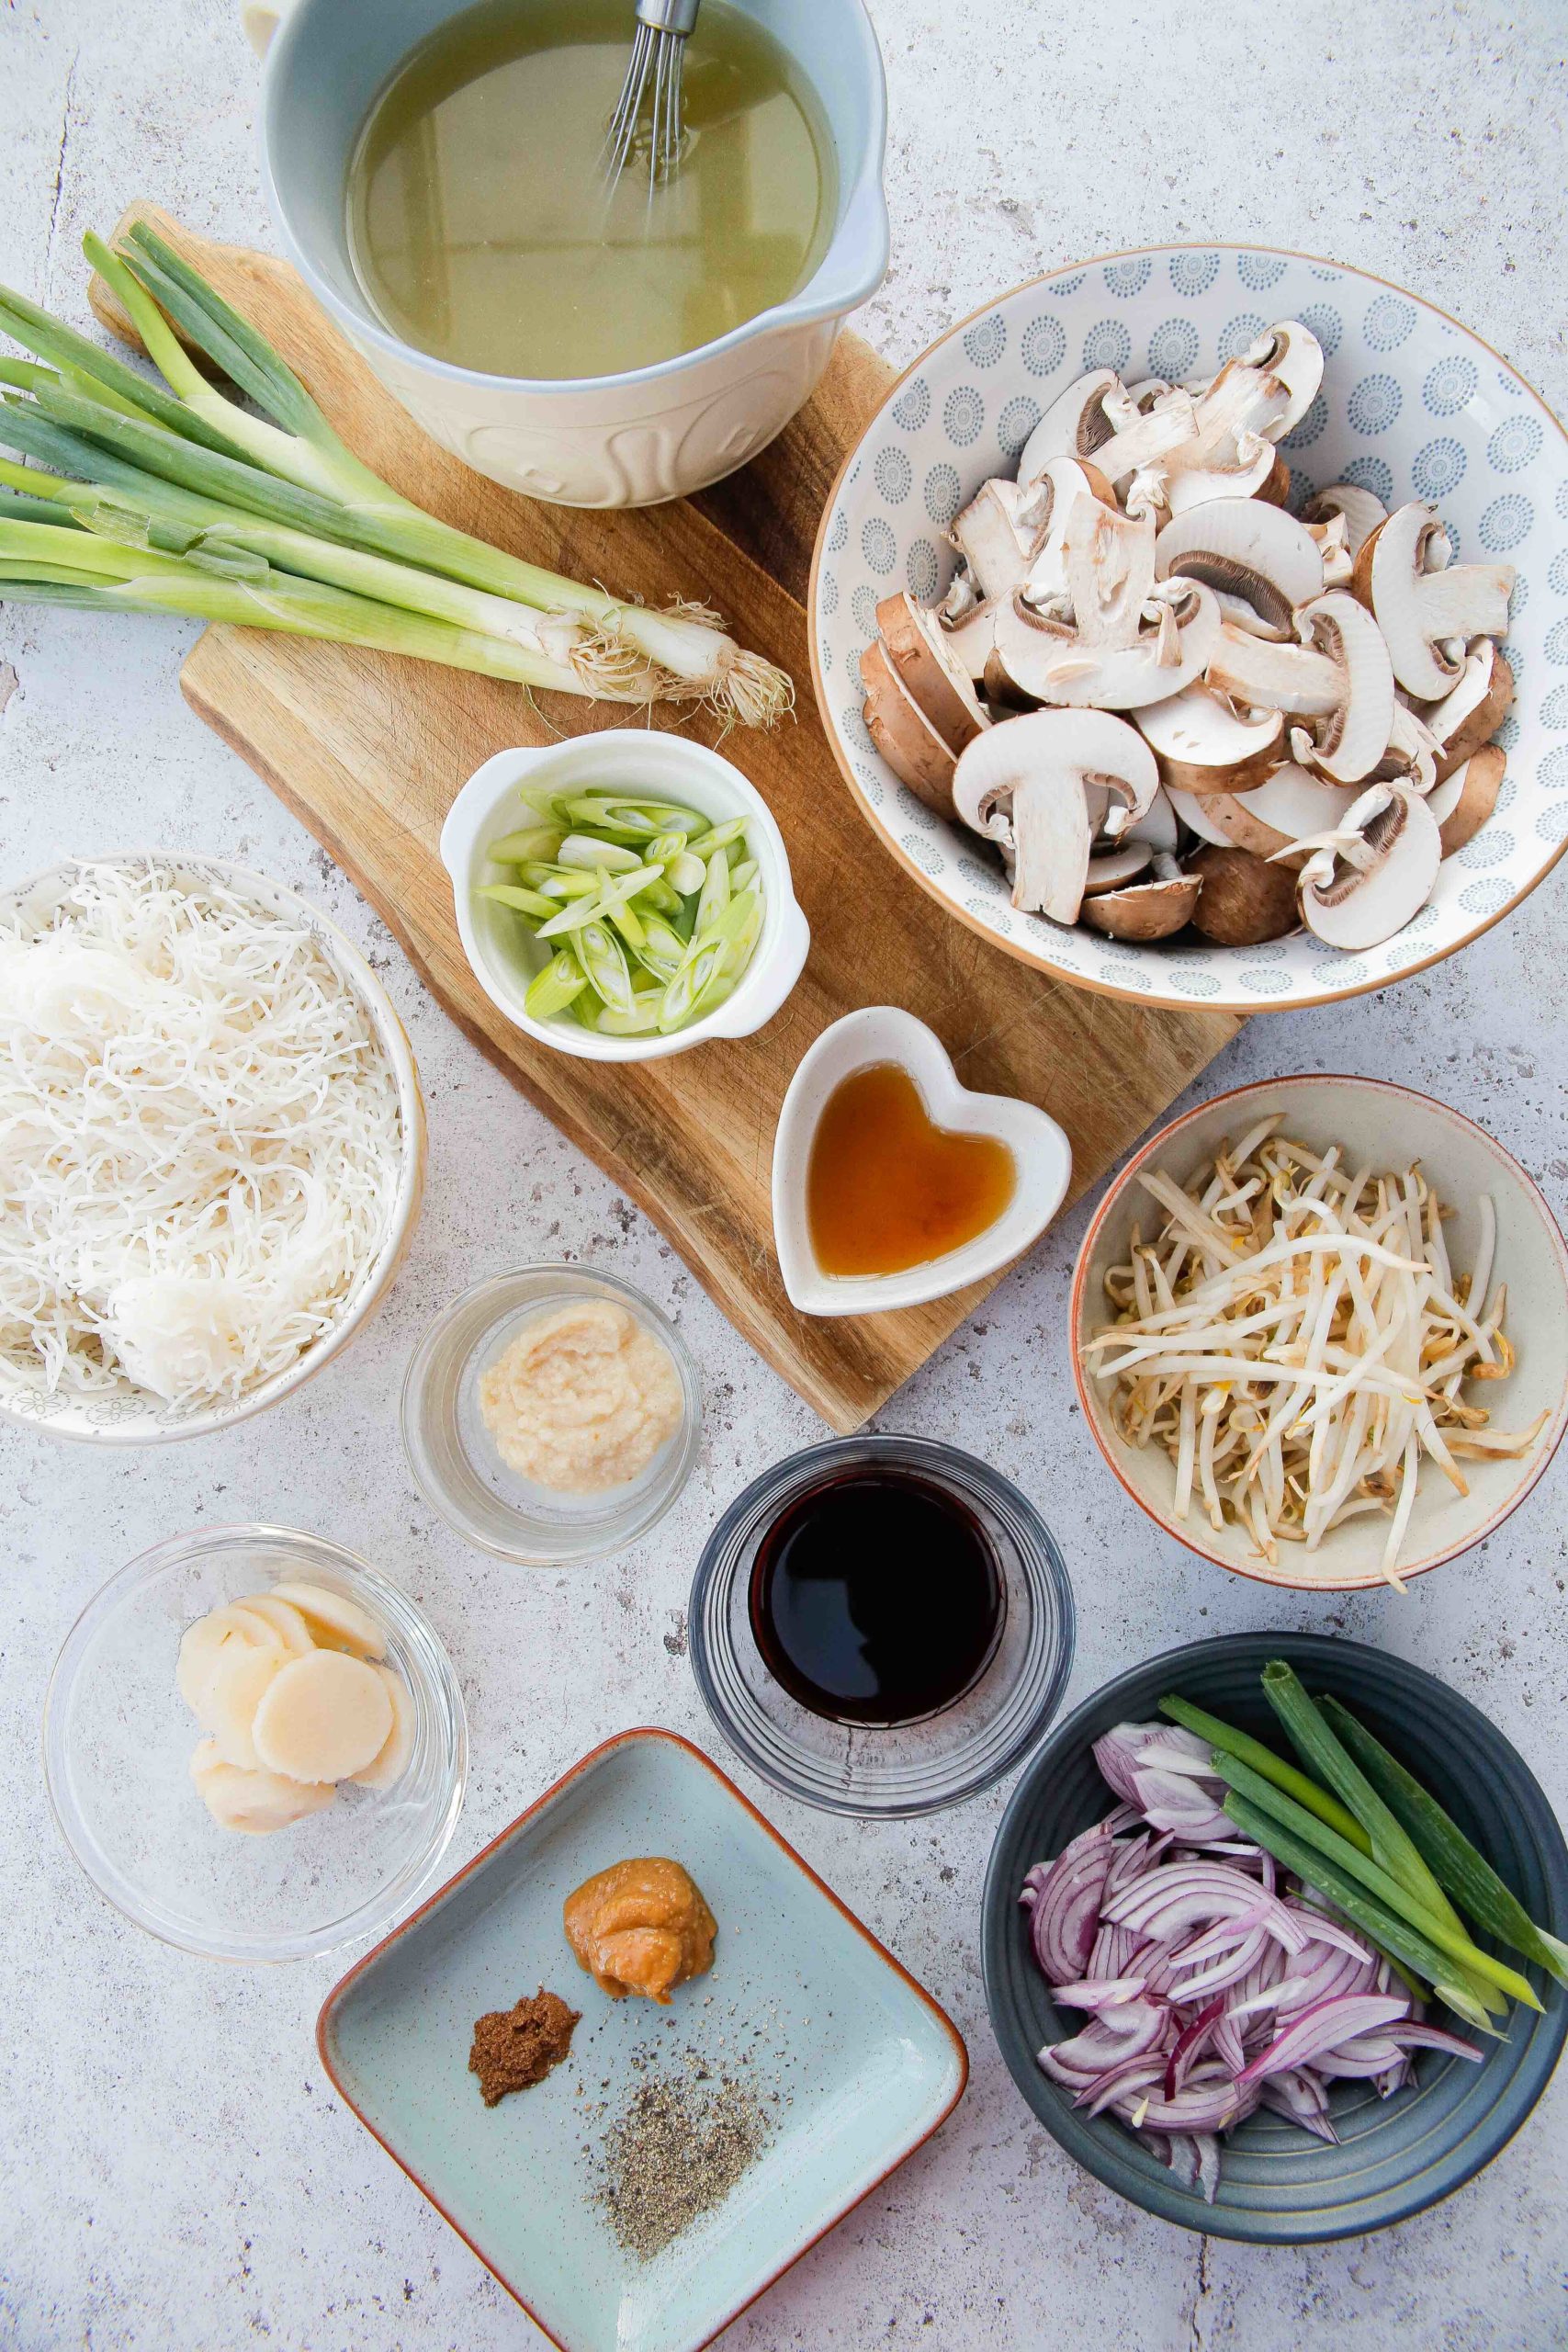 This gently spiced vegan noodle soup is full of bright fresh flavours and topped with rich umami mushrooms | Recipe on the cookandhim.com #noodlesoup #asianfood #vegan #easyveganrecipe